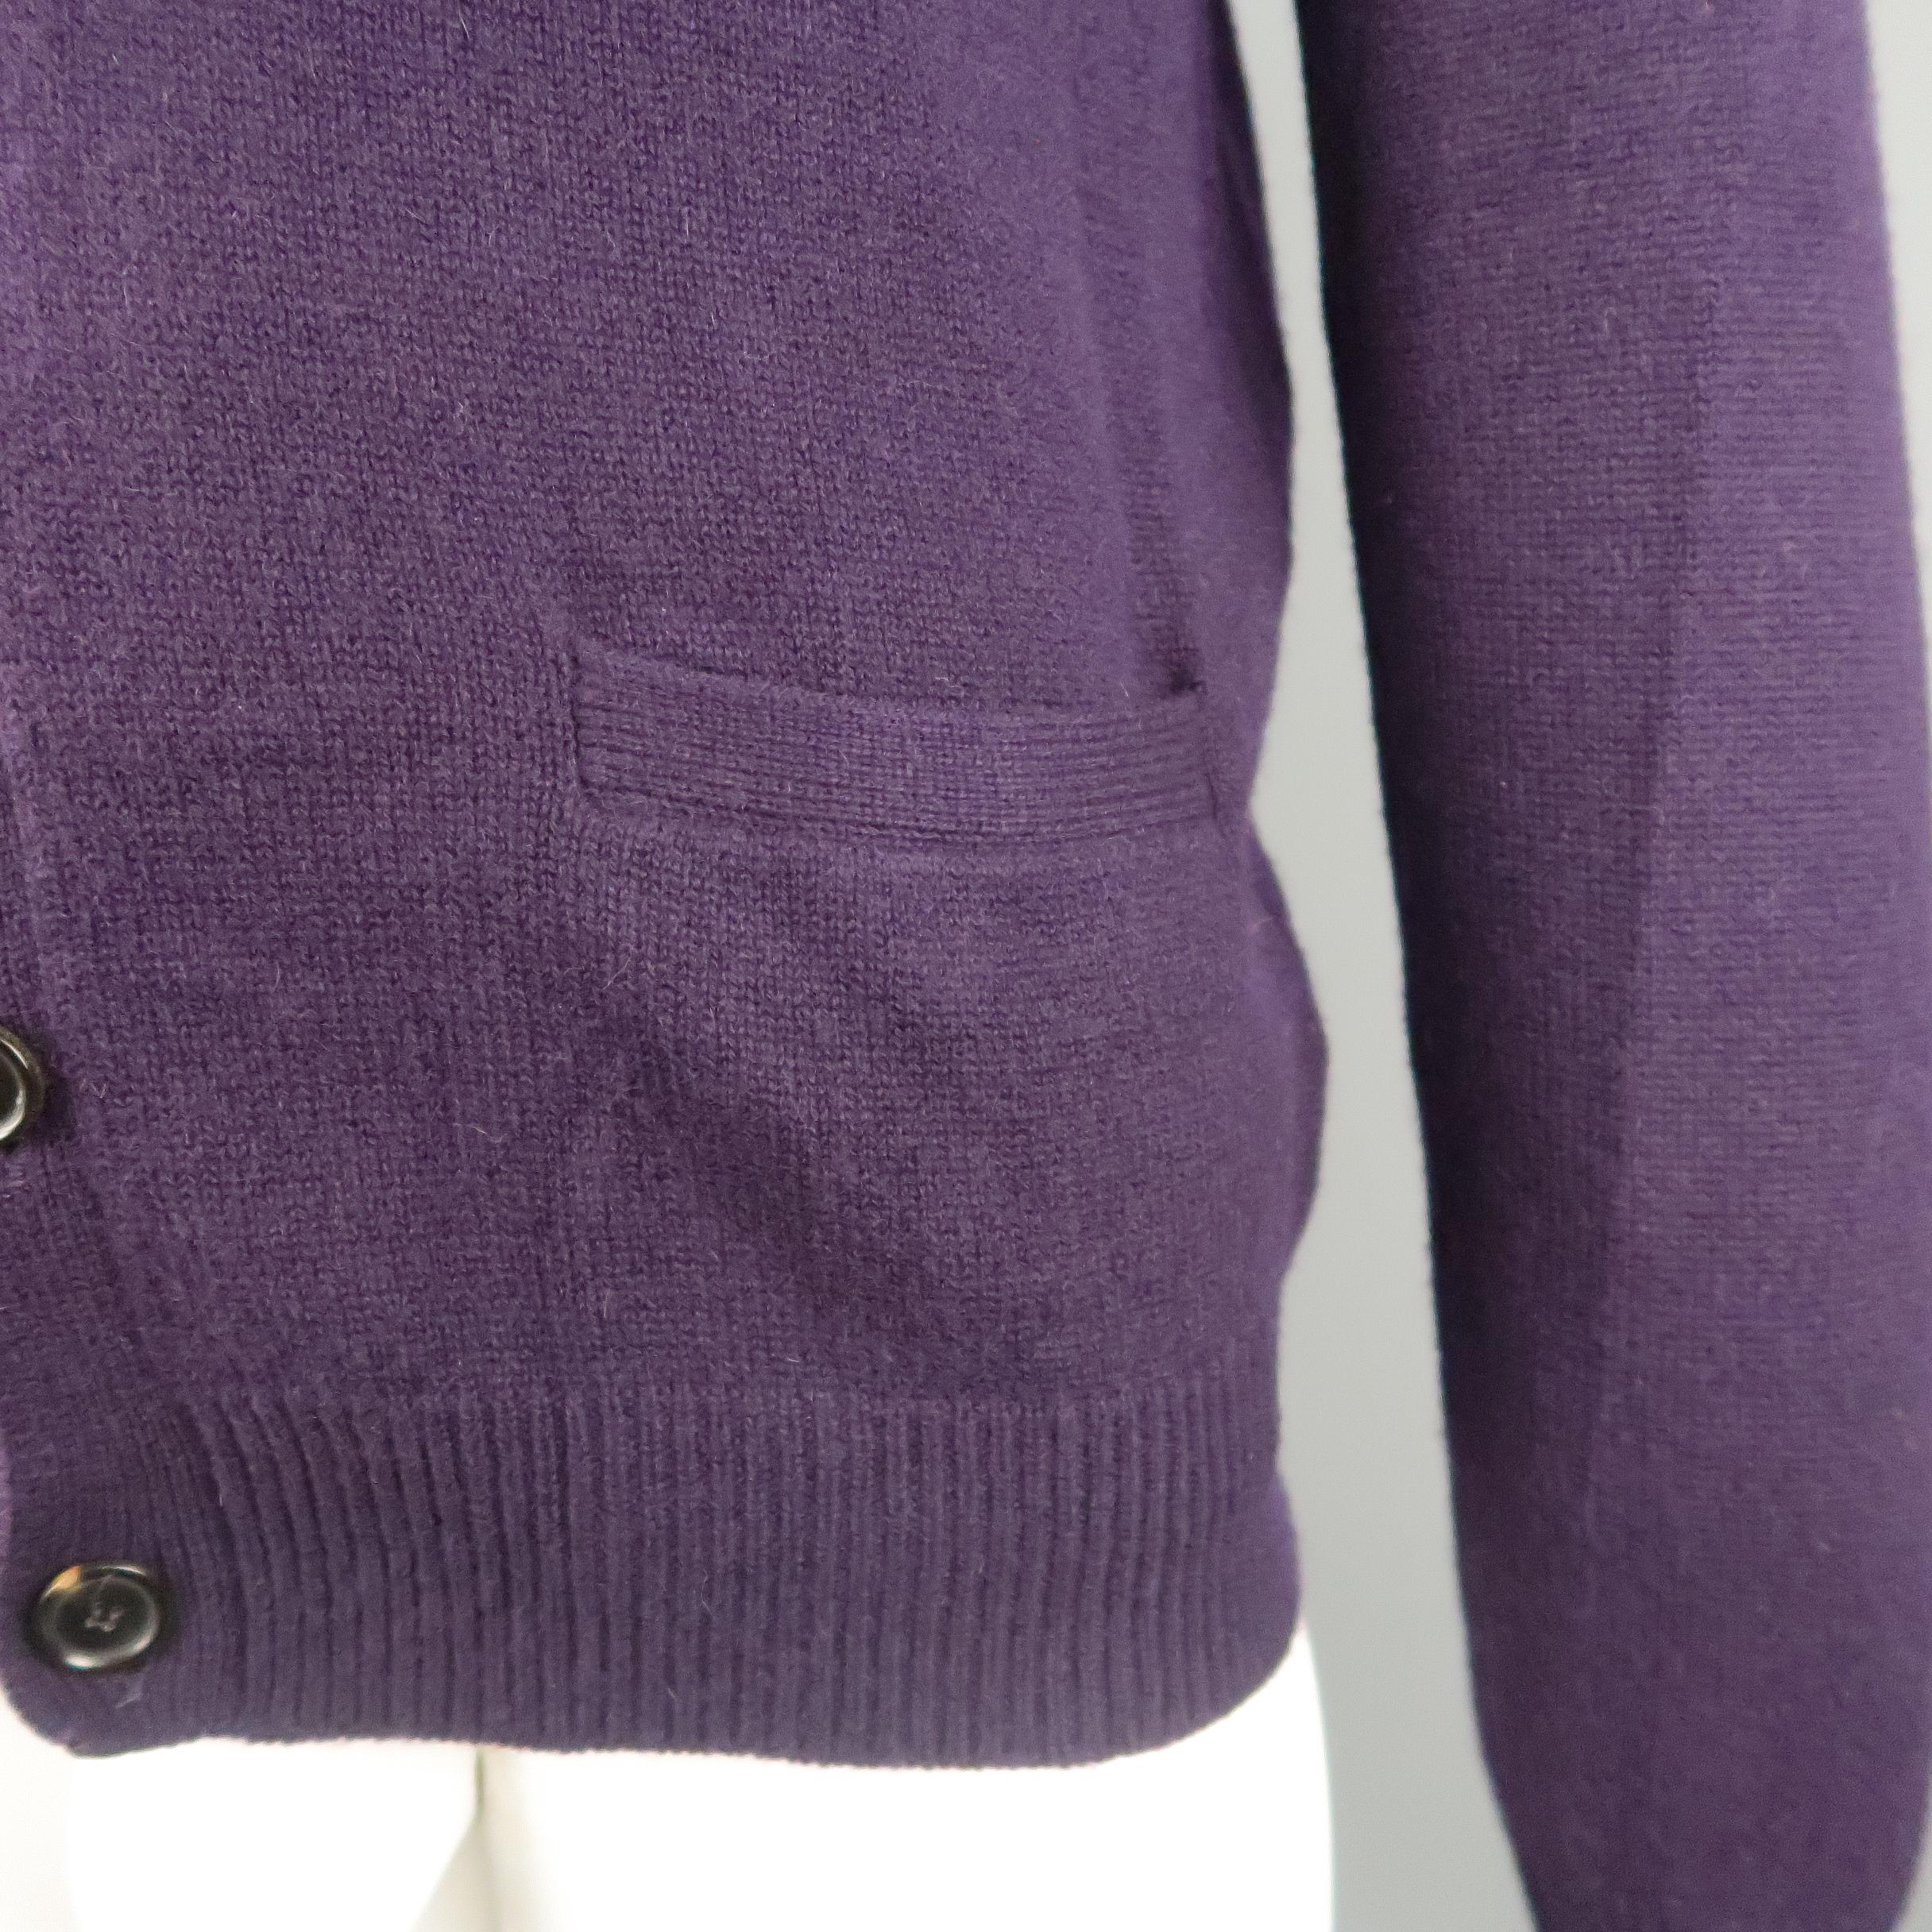 Black RALPH LAUREN Size M Eggplant Knitted Cashmere Cardigan Sweater